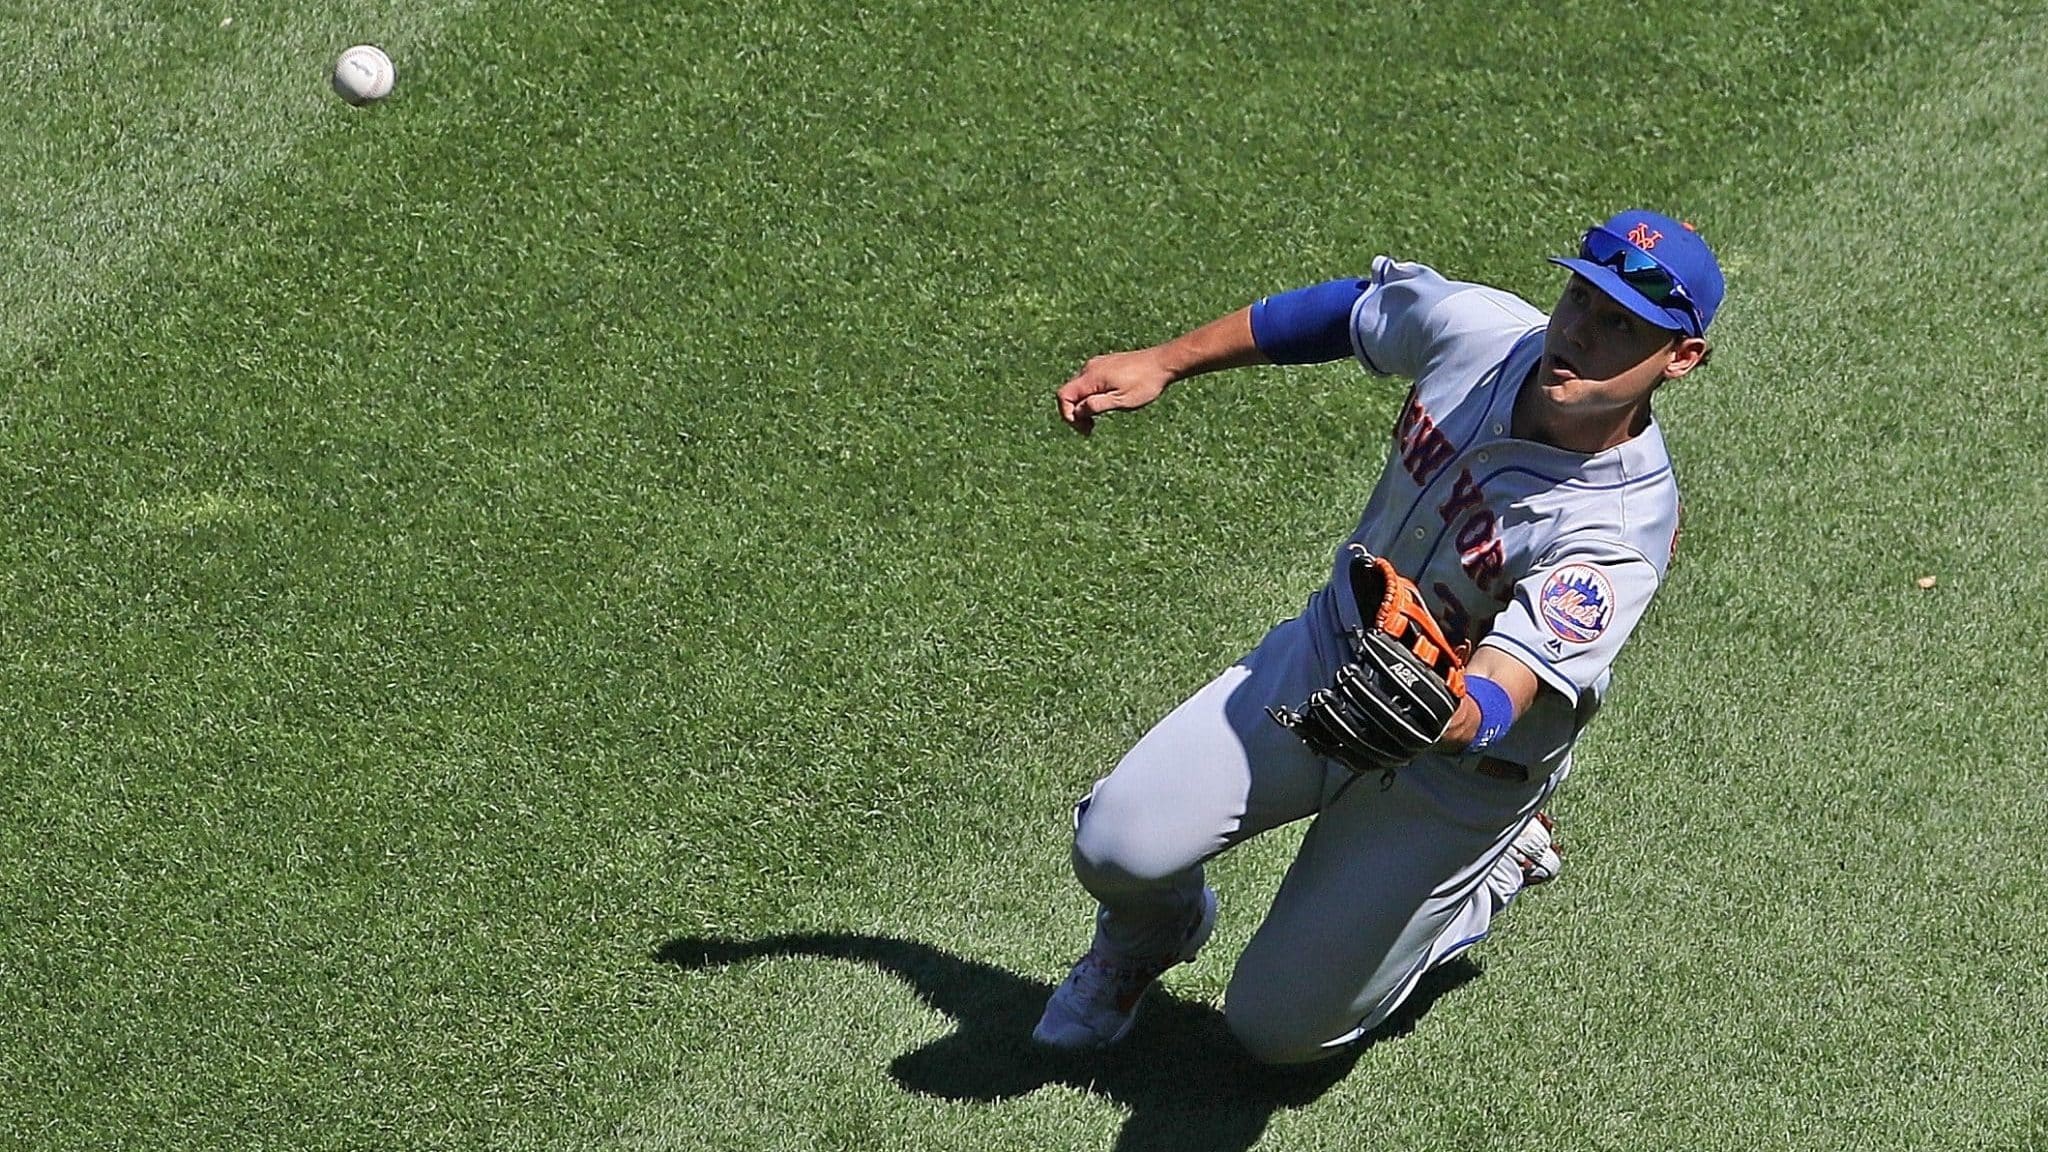 CHICAGO, ILLINOIS - AUGUST 01: Michael Conforto #30 of the New York Mets makes a sliding catch to end the 7th inning against the Chicago White Sox at Guaranteed Rate Field on August 01, 2019 in Chicago, Illinois.